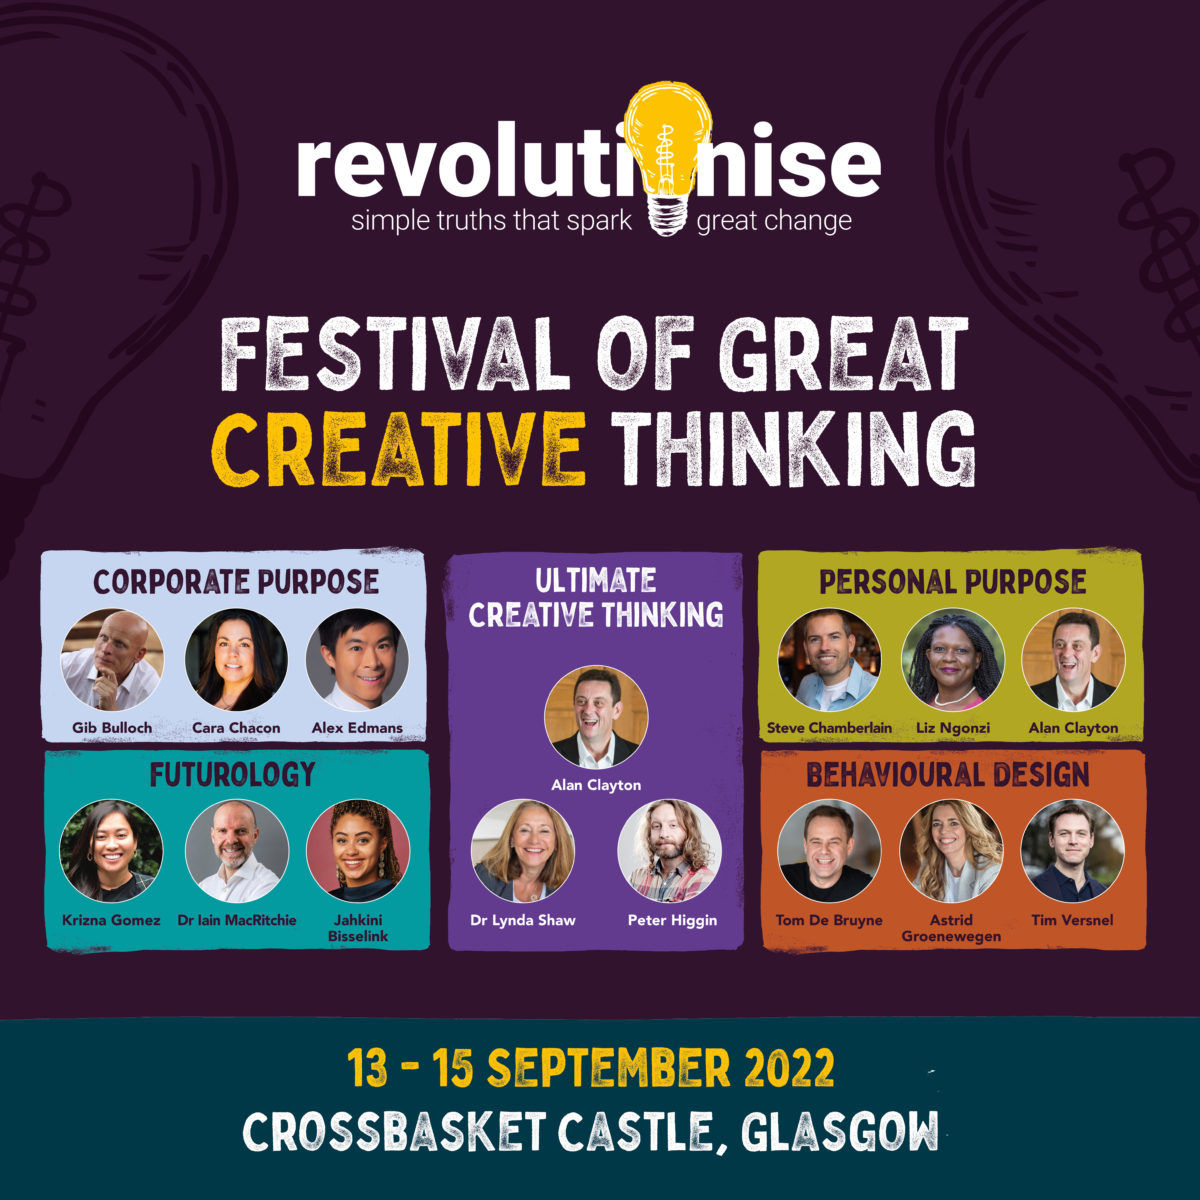 The Festival of Great Creative Thinking